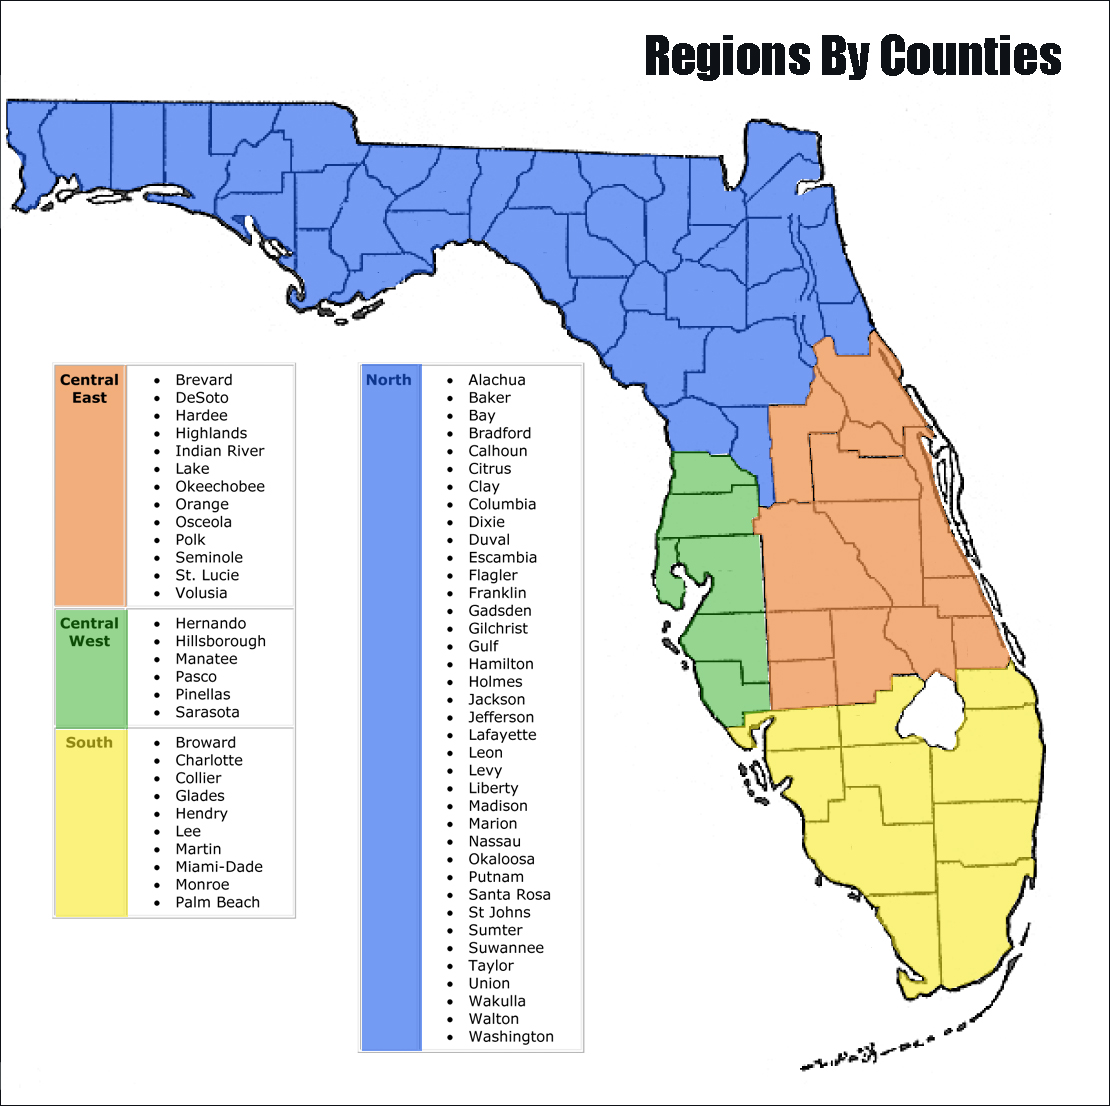 Florida Registry of Interpreters for the Deaf - Elections